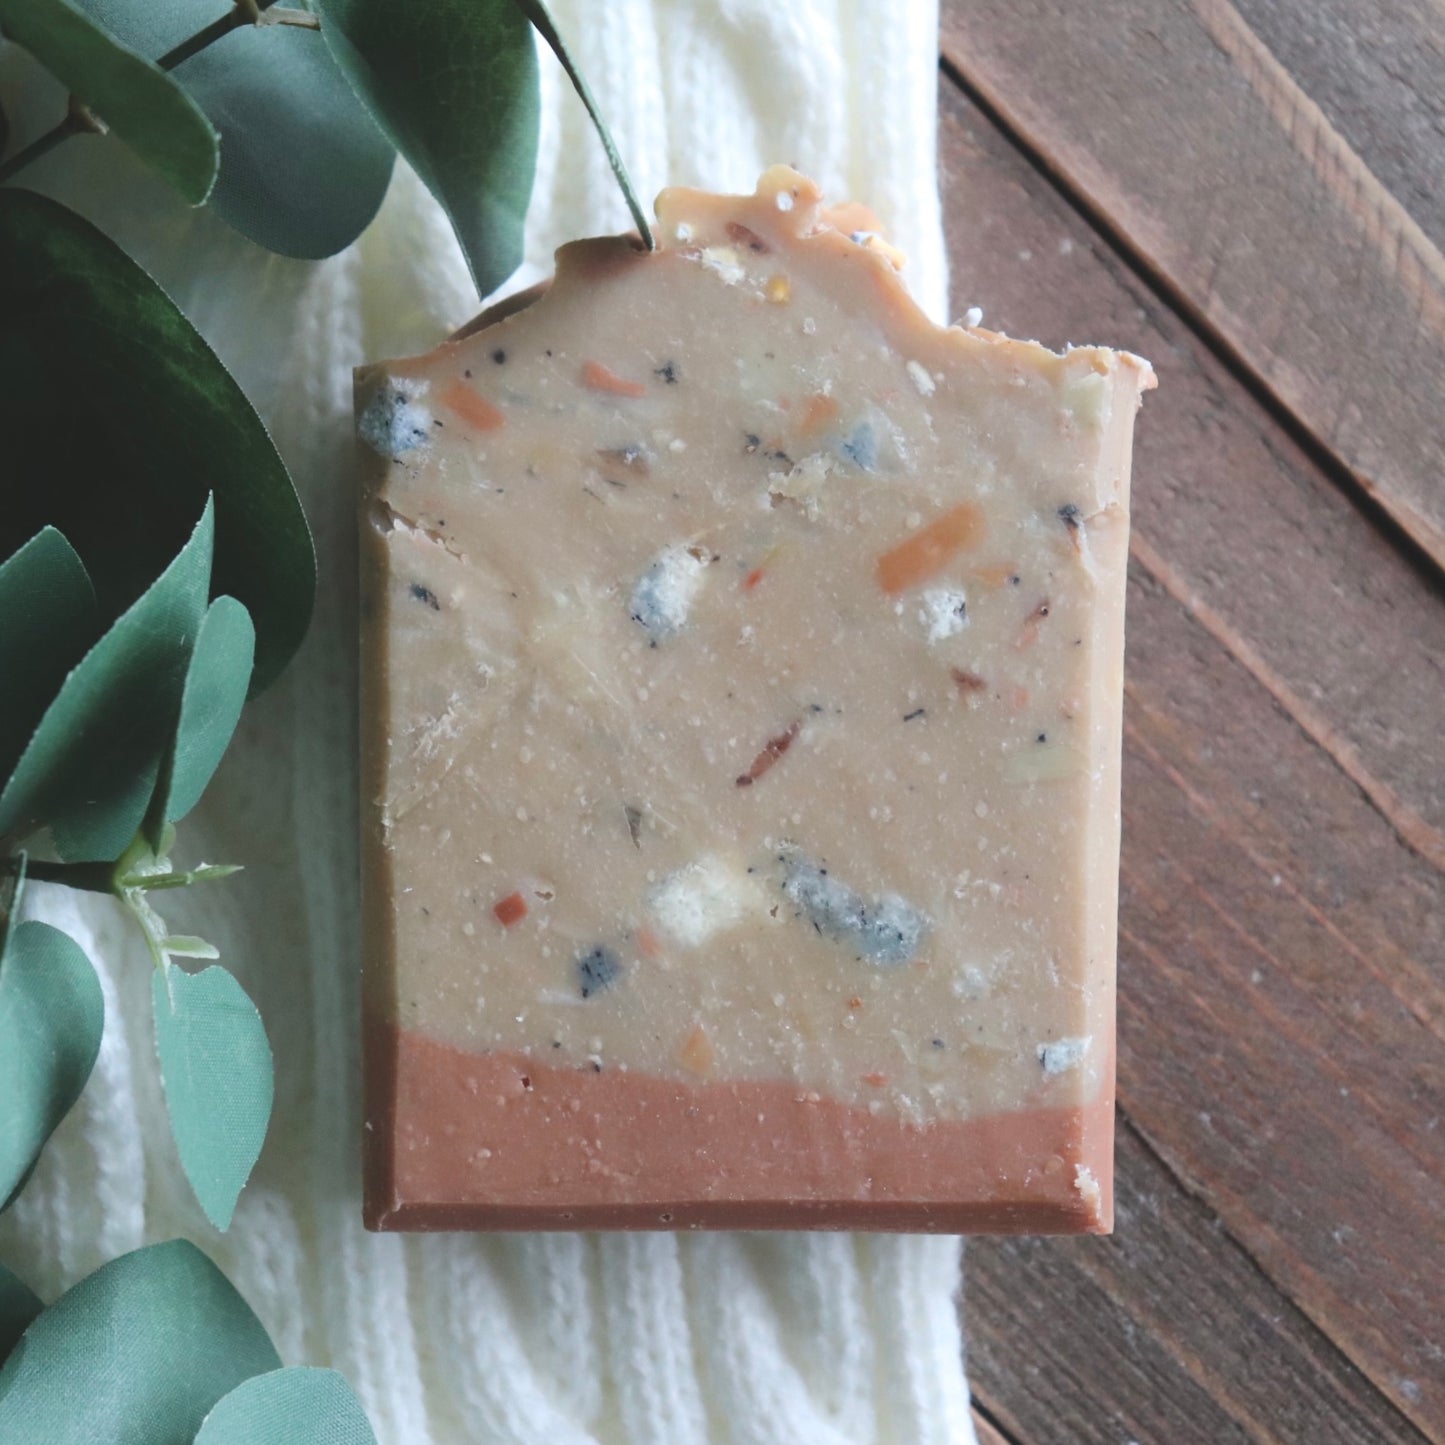 handcrafted soap bar with other soap pieces embedded to make the soap look sprinkled with confetti